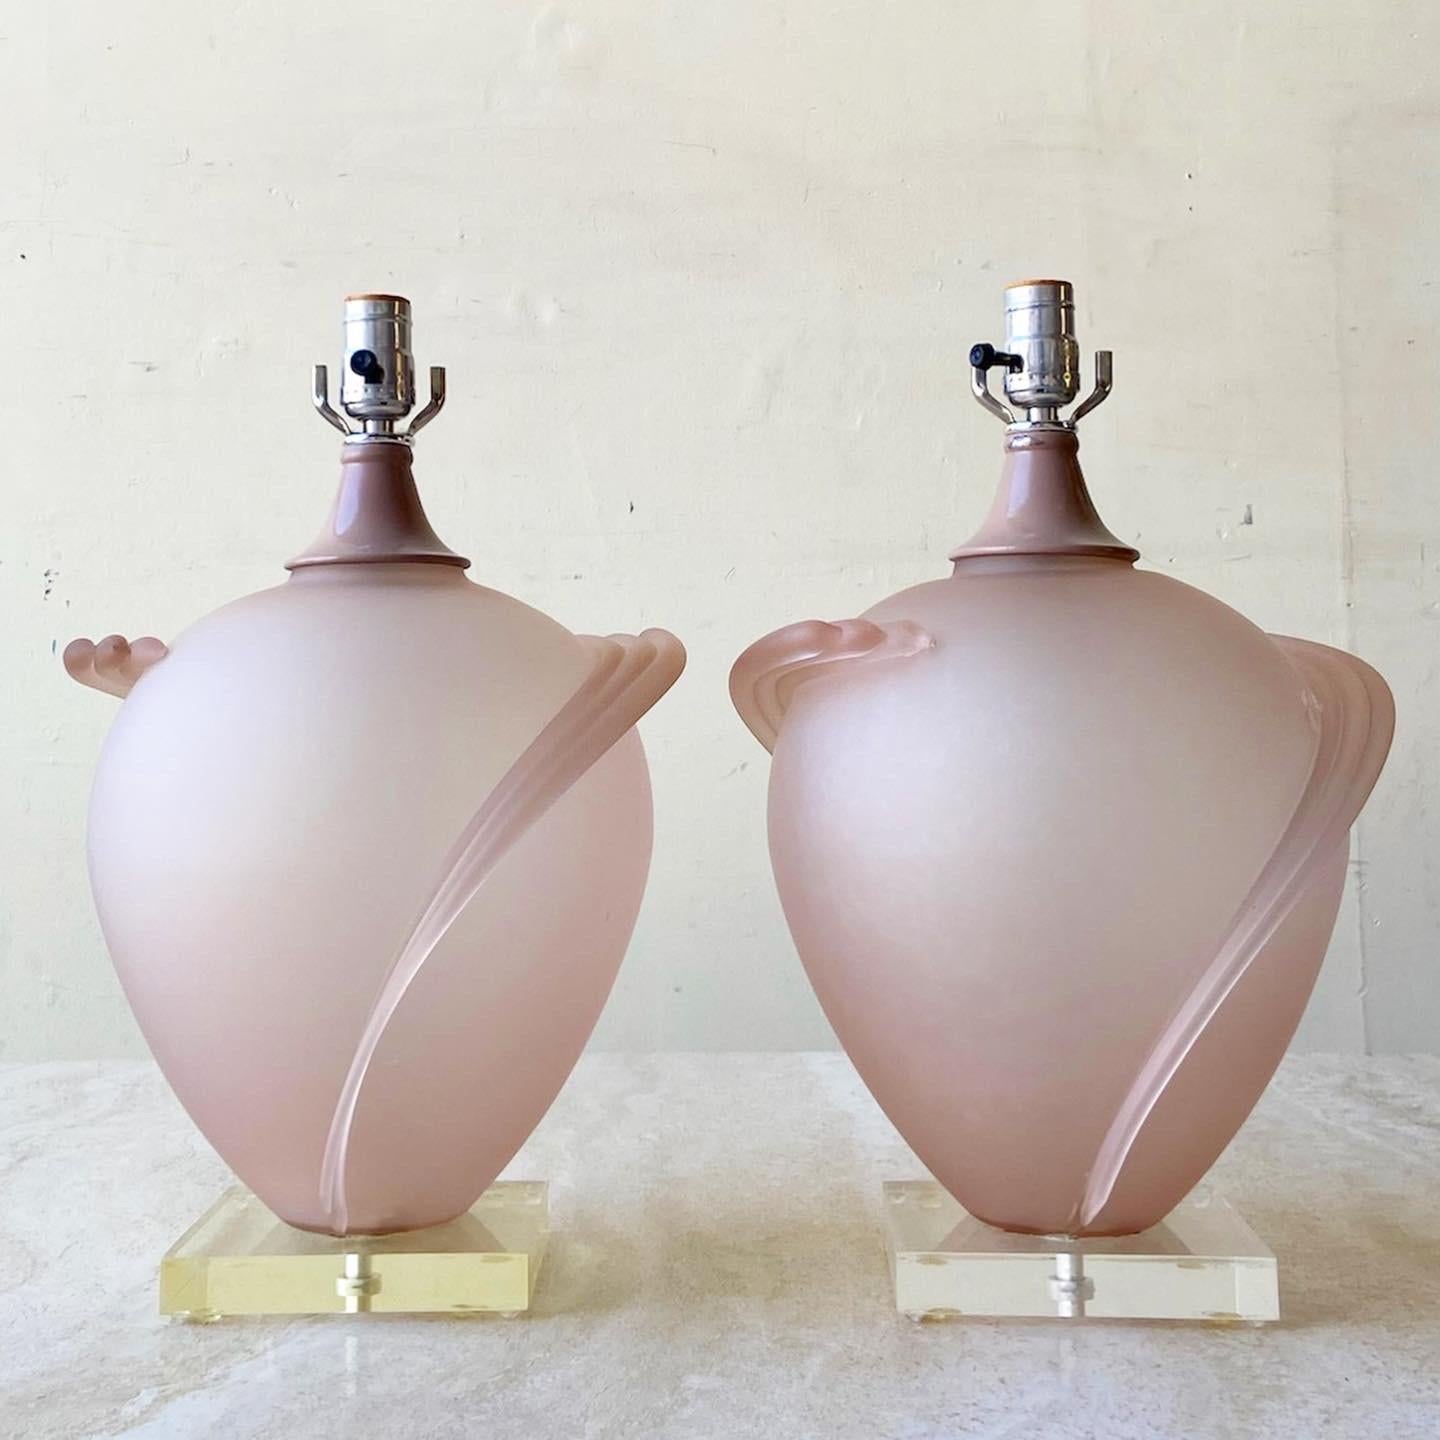 Incredible postmodern pair of table lamps. Each feature a sculpted pink glass body with wings on a lucite base.
